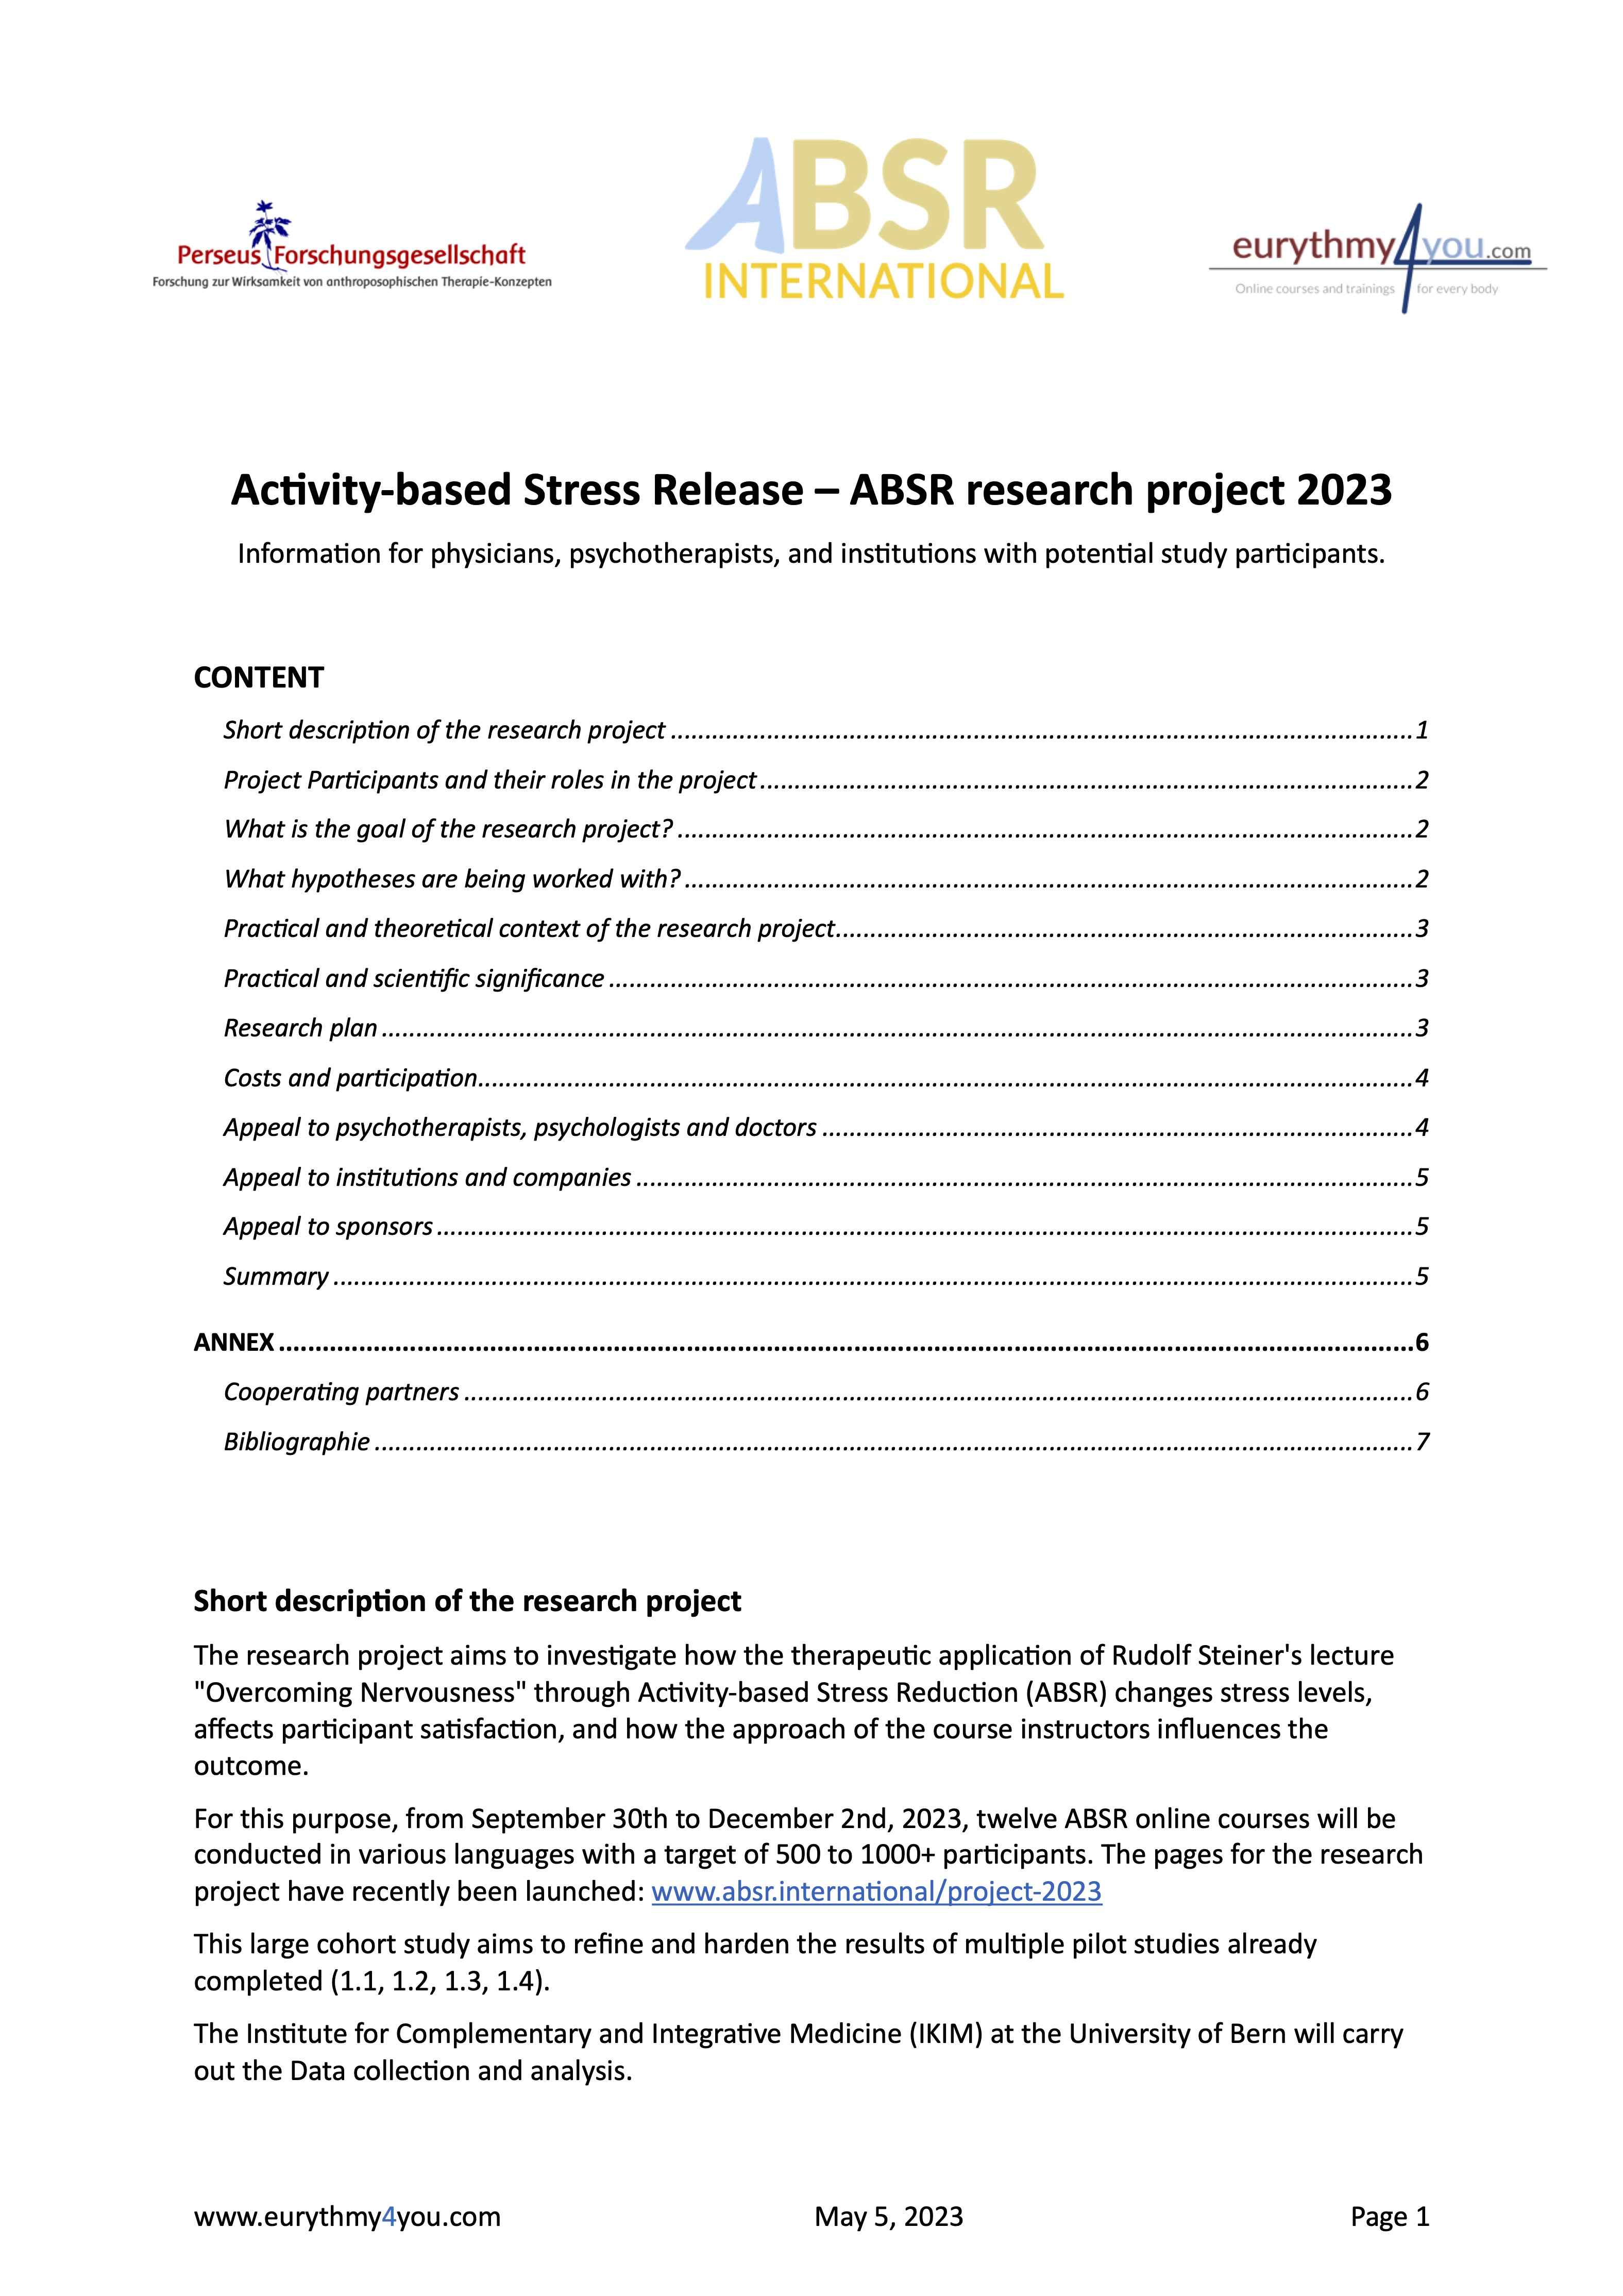 ABSR Research Project 2023 - Information for Partners EN page 1